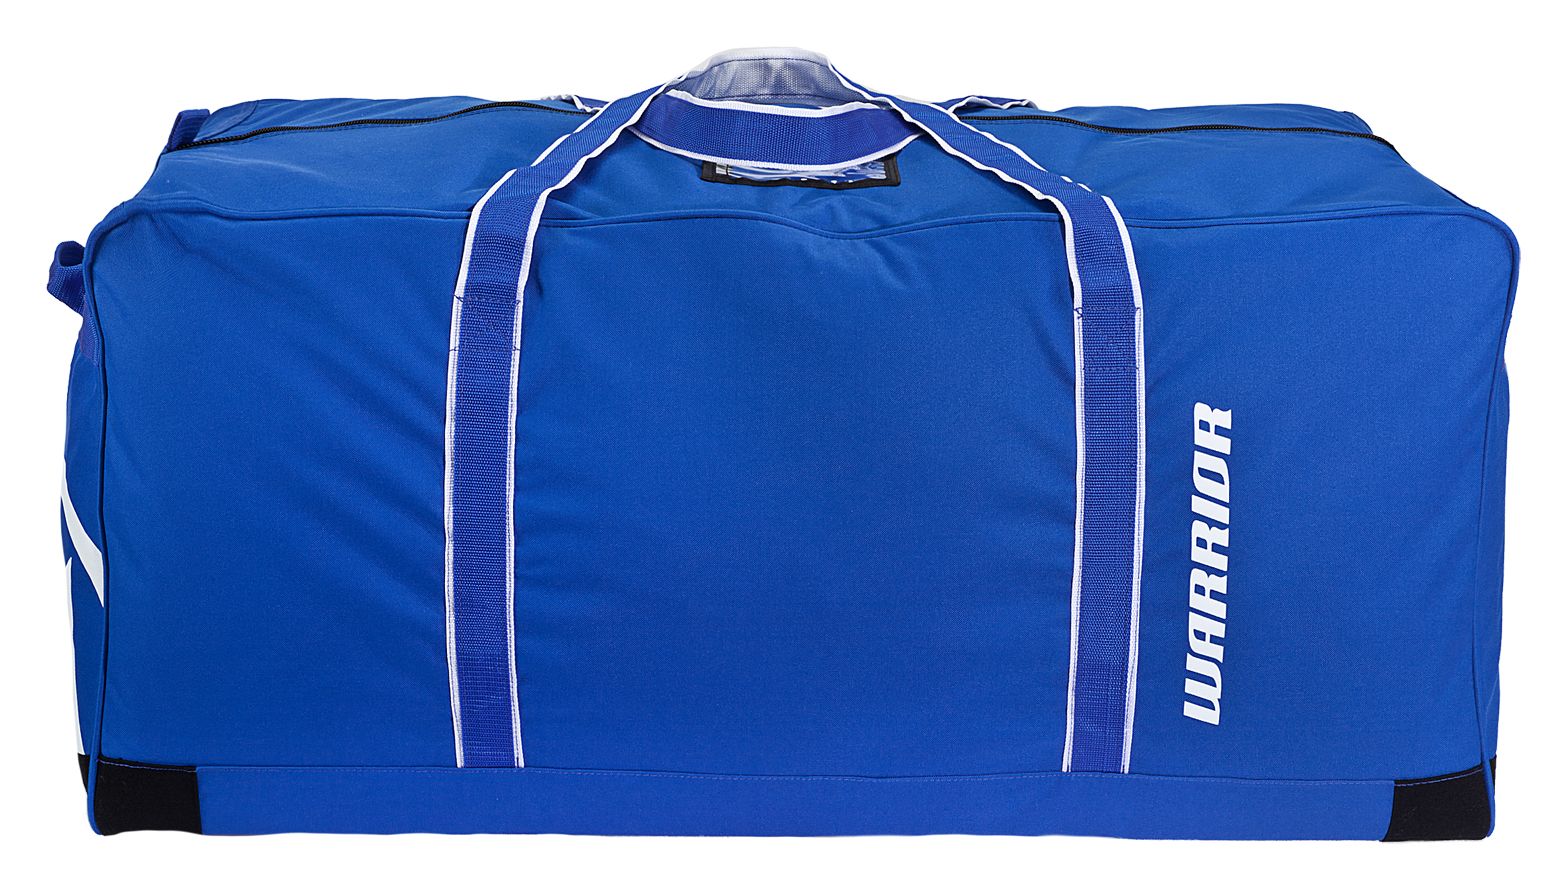 Team Goalie Duffel Bag, Royal Blue with White image number 0